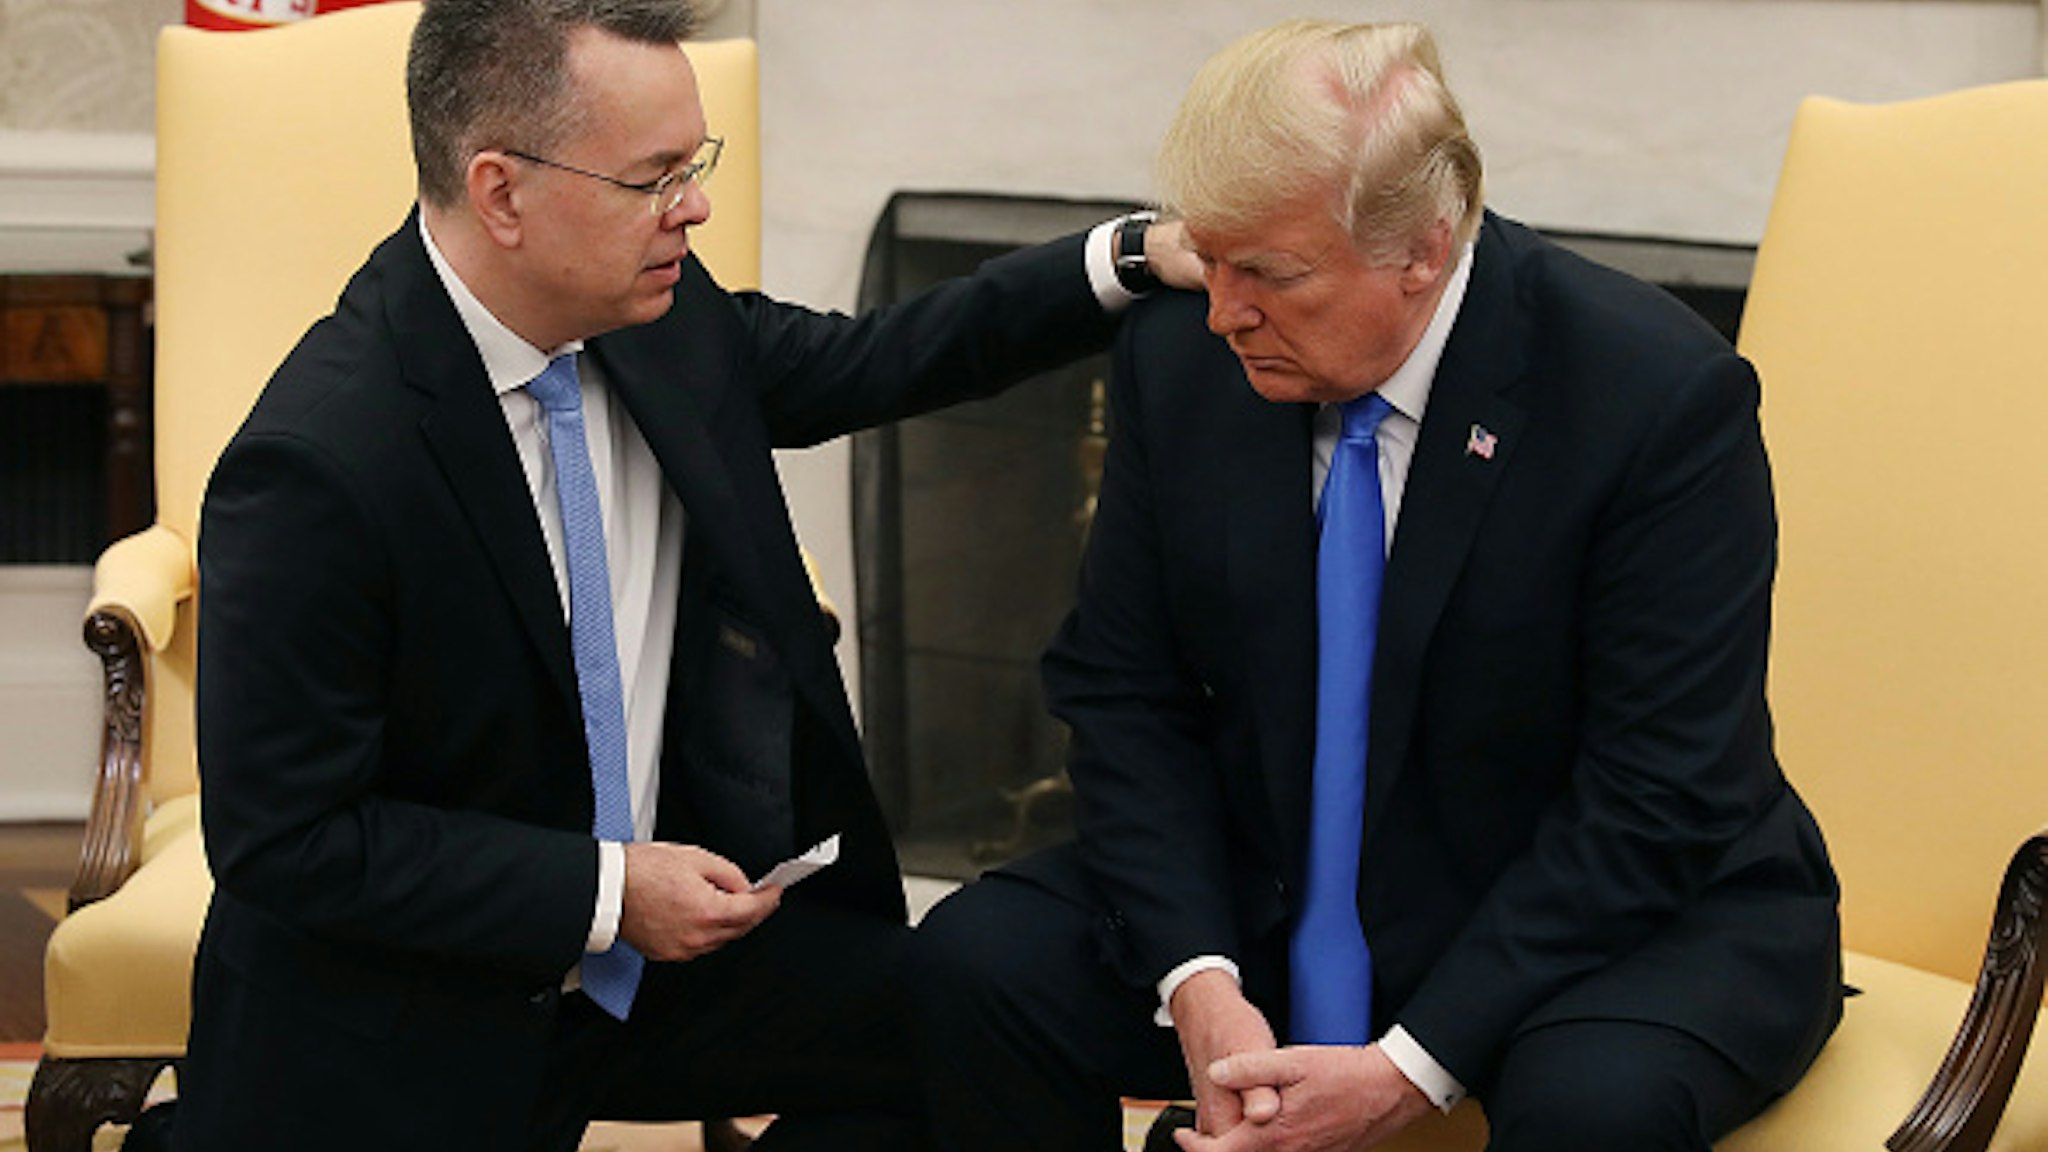 WASHINGTON, DC - OCTOBER 13: U.S. President Donald Trump and American evangelical Christian preacher Andrew Brunson (L) participate in a prayer in the Oval Office a day after he was released from a Turkish jail, at the White House on October 13, 2018 in Washington, DC. Brunson was detained for two years in Turkey on espionage and terrorism-related charges that the pastor said were false.